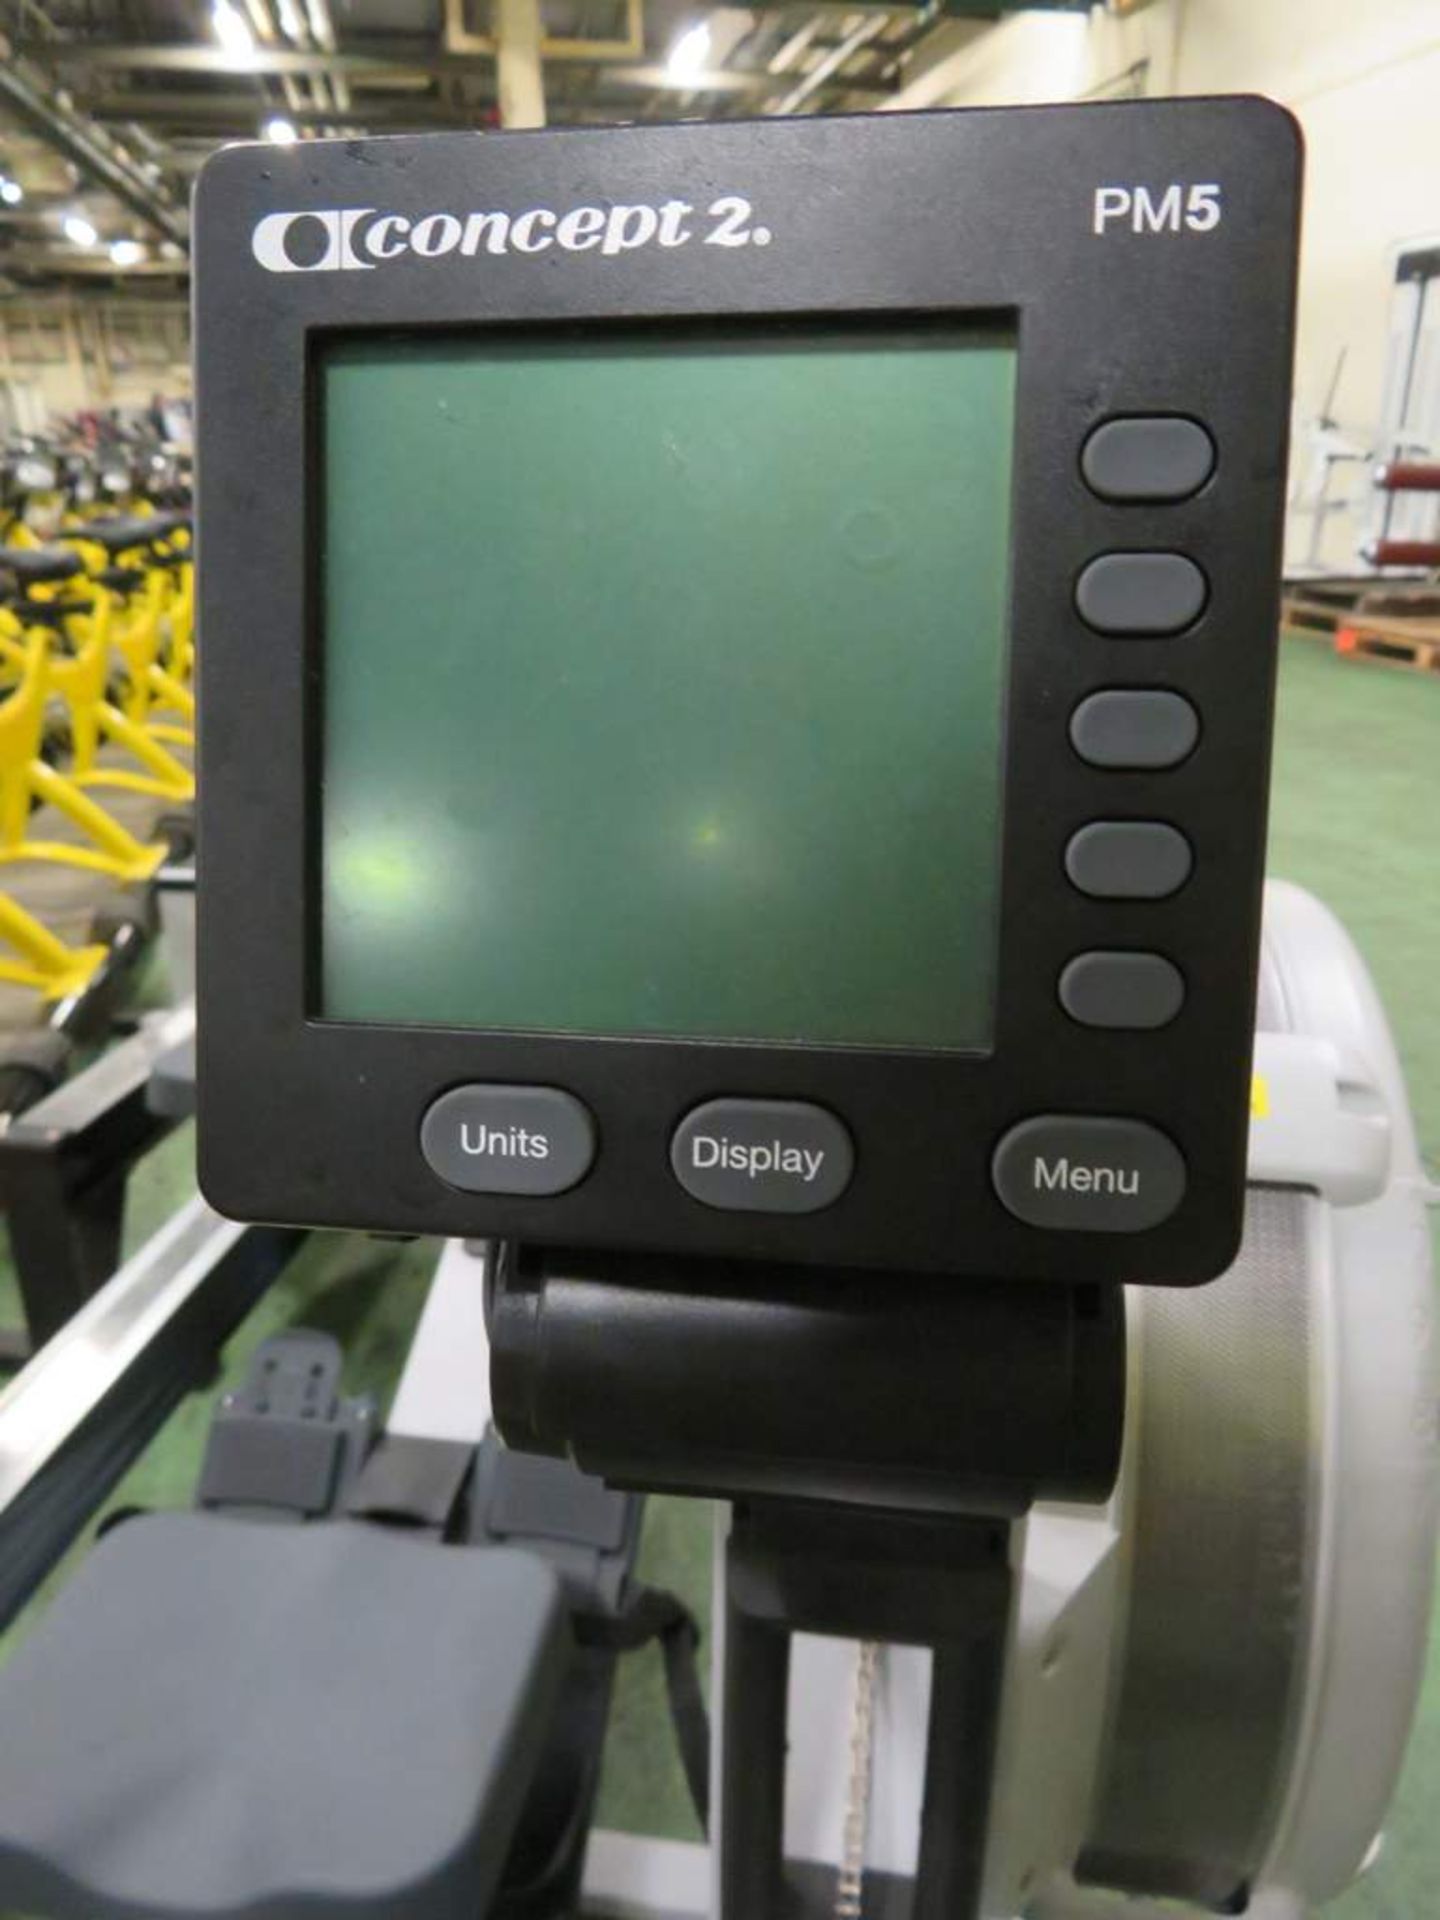 Concept 2 Indoor Rowing Machine, Model D, Complete With PM5 Display Console. - Image 4 of 6